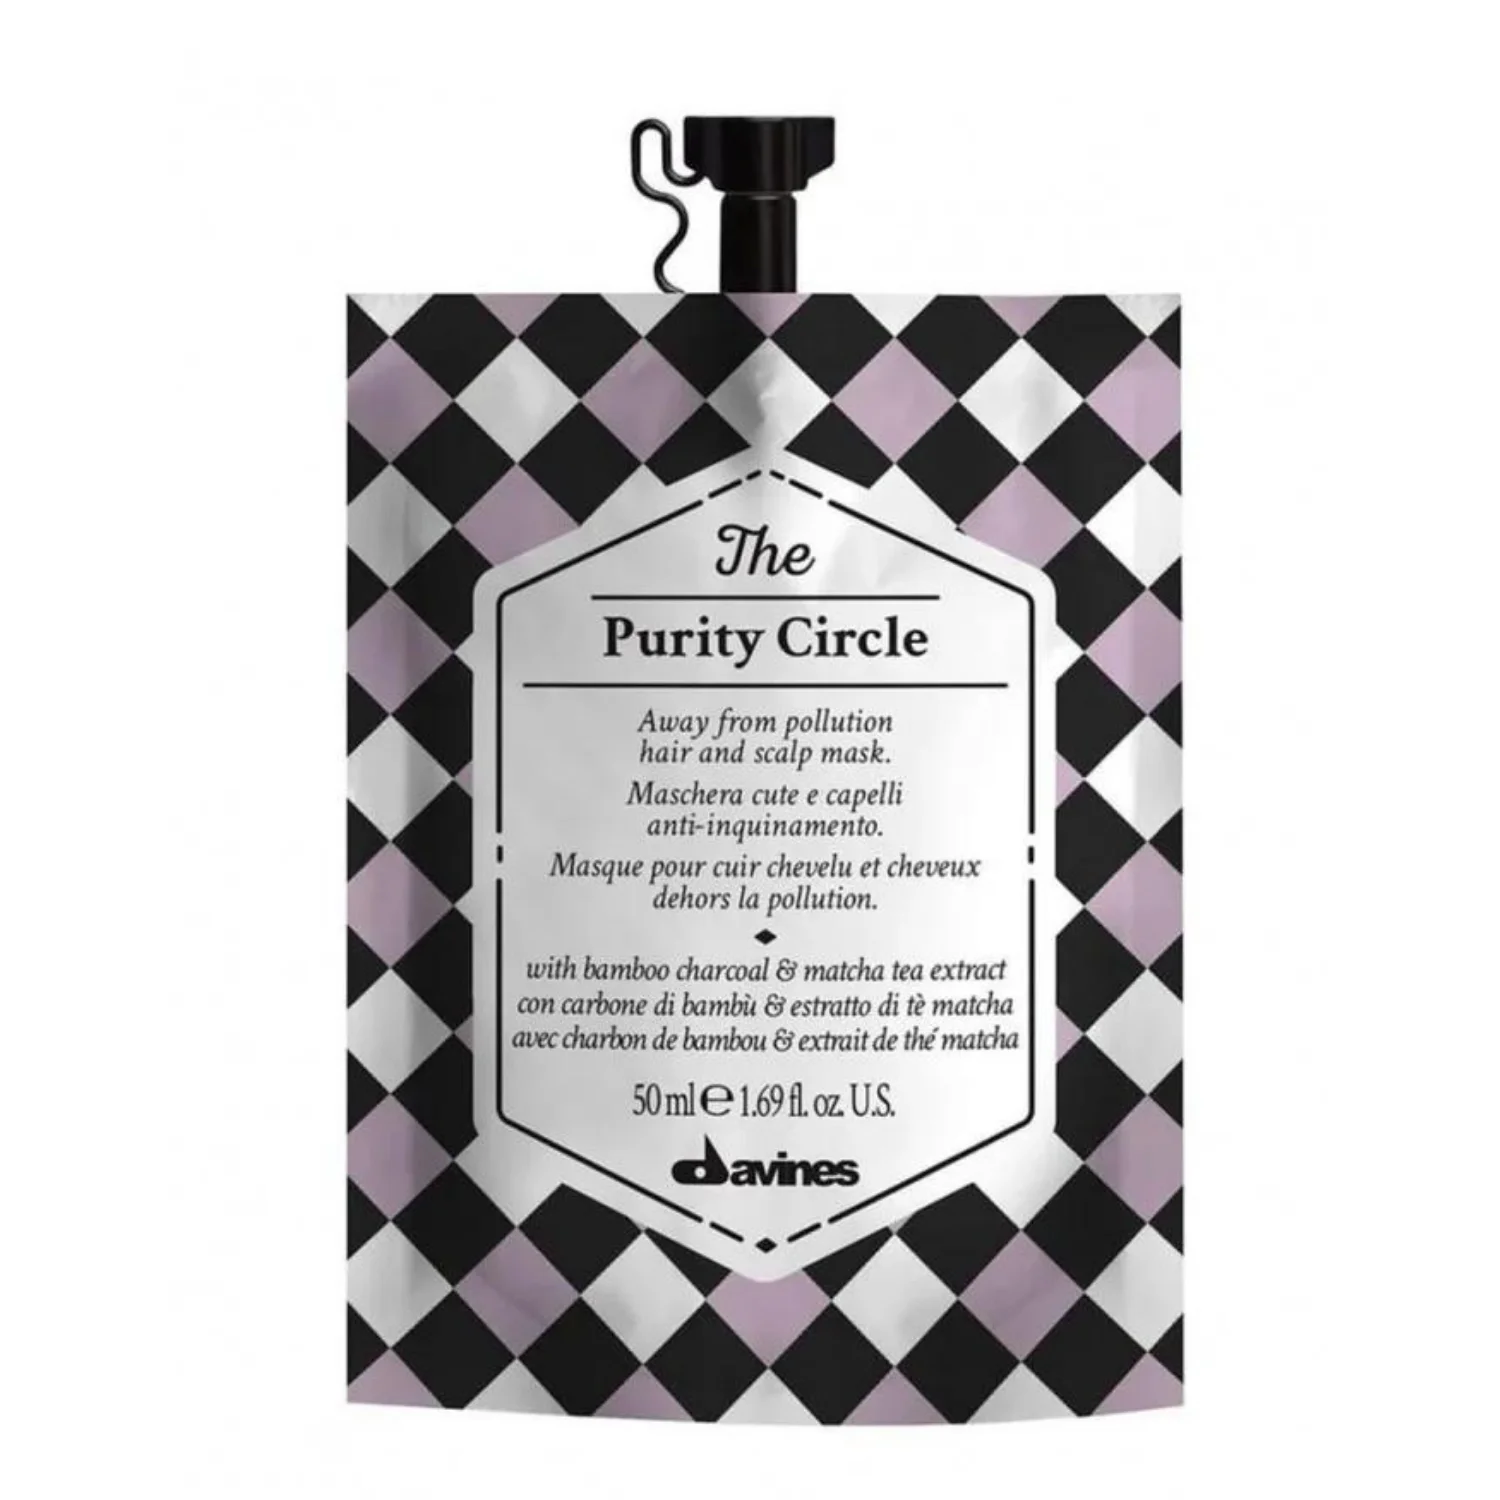 

Davines The Purity Circle Purifying Hair Care Mask 50 ml